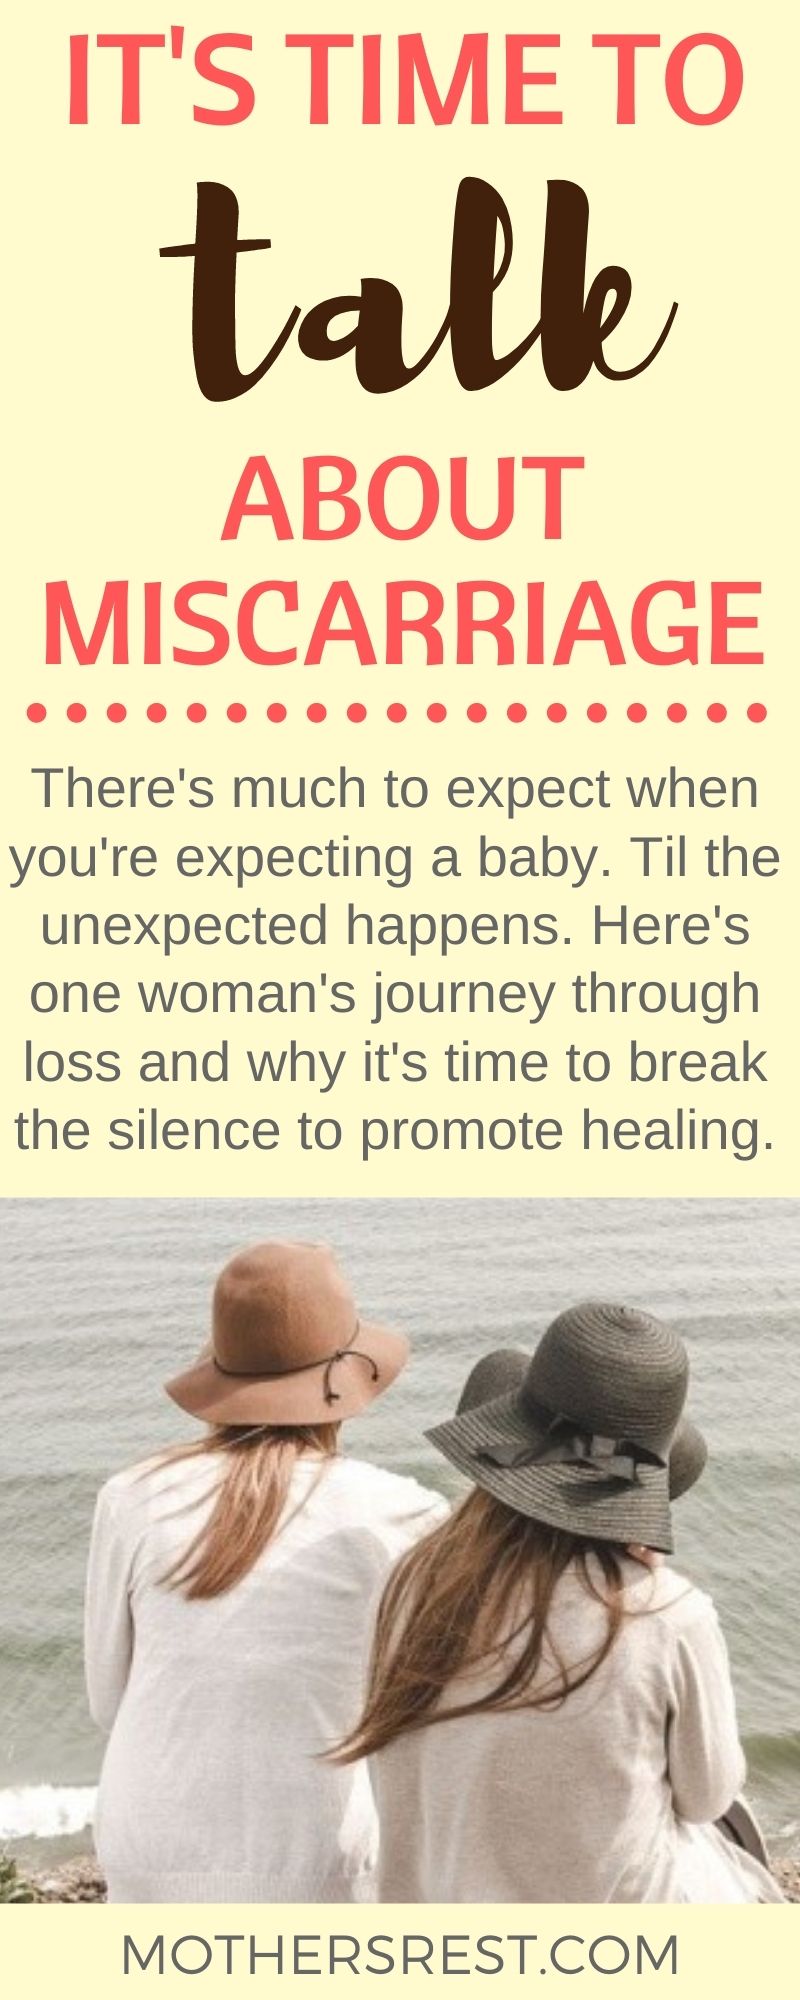 There is so much to expect when you are expecting a baby. Til the unexpected happens. Here is the story of one woman who journeyed through miscarriage and loss. And why it is time to break the silence to promote healing.